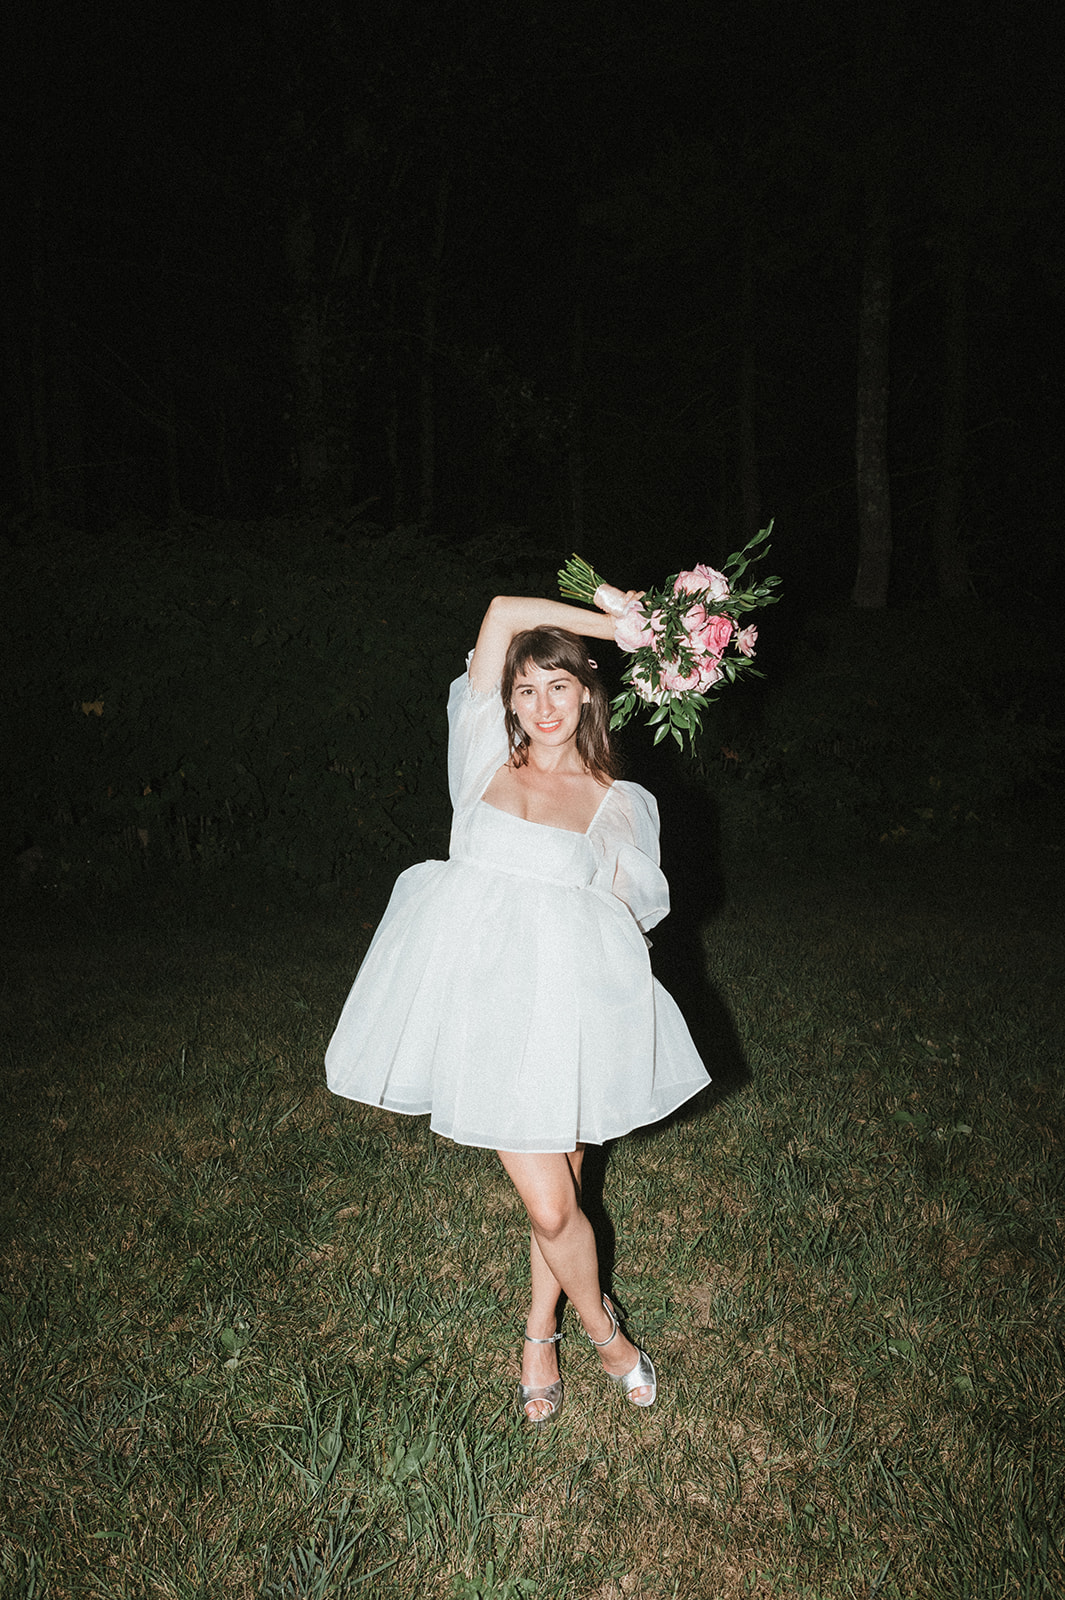 Bride poses with bouquet in Selkie dress at Kitz Farm New Hampshire Wedding